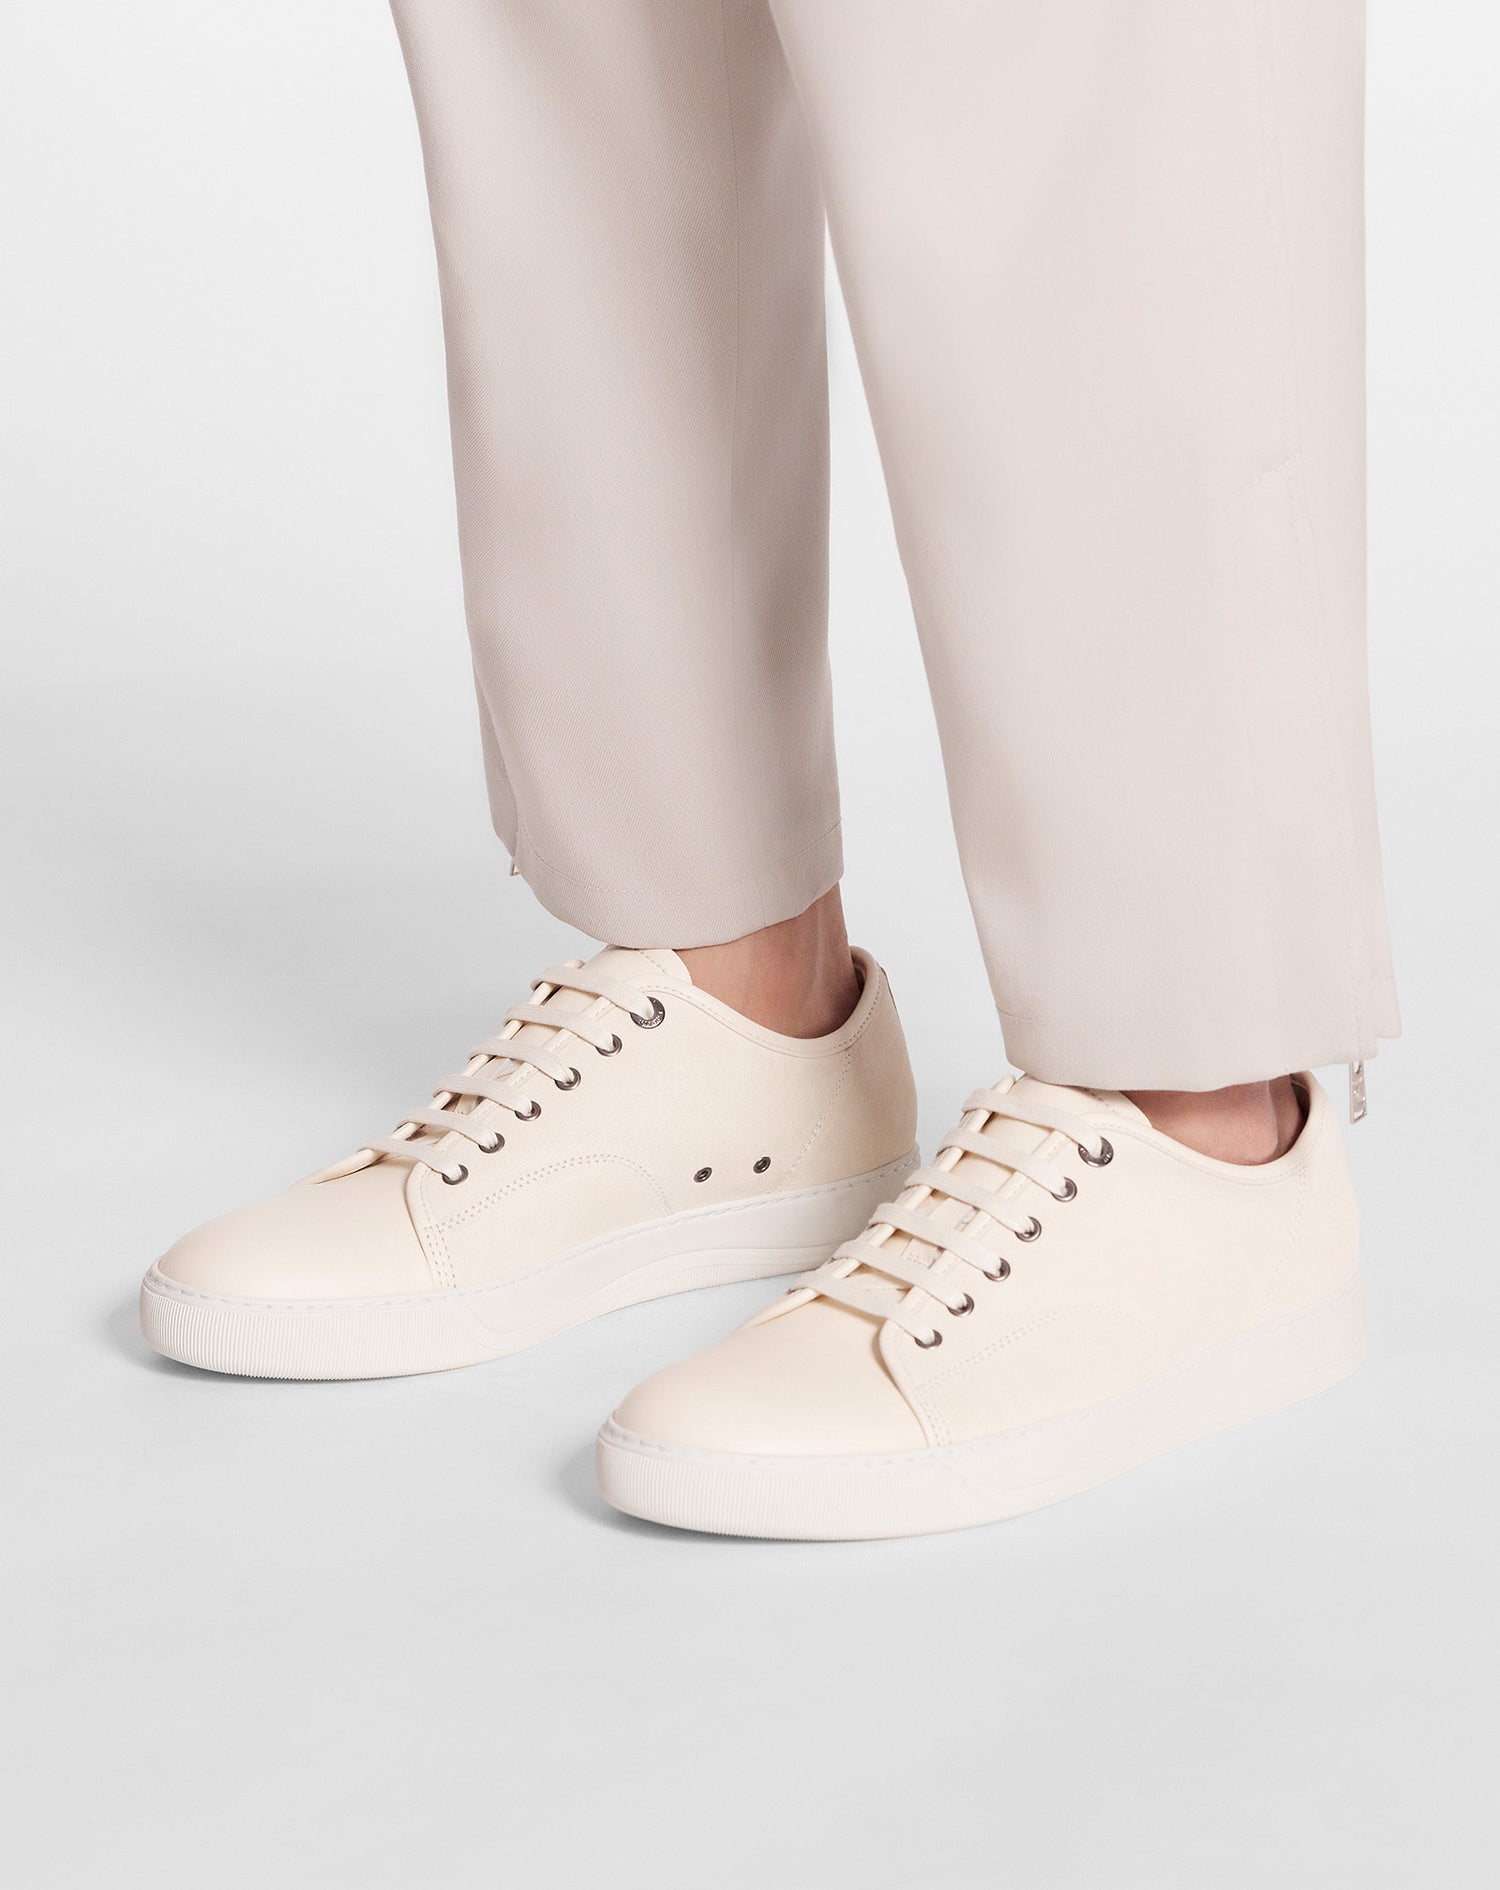 DBB1 LEATHER AND SUEDE SNEAKERS CREAM | Lanvin – LANVIN